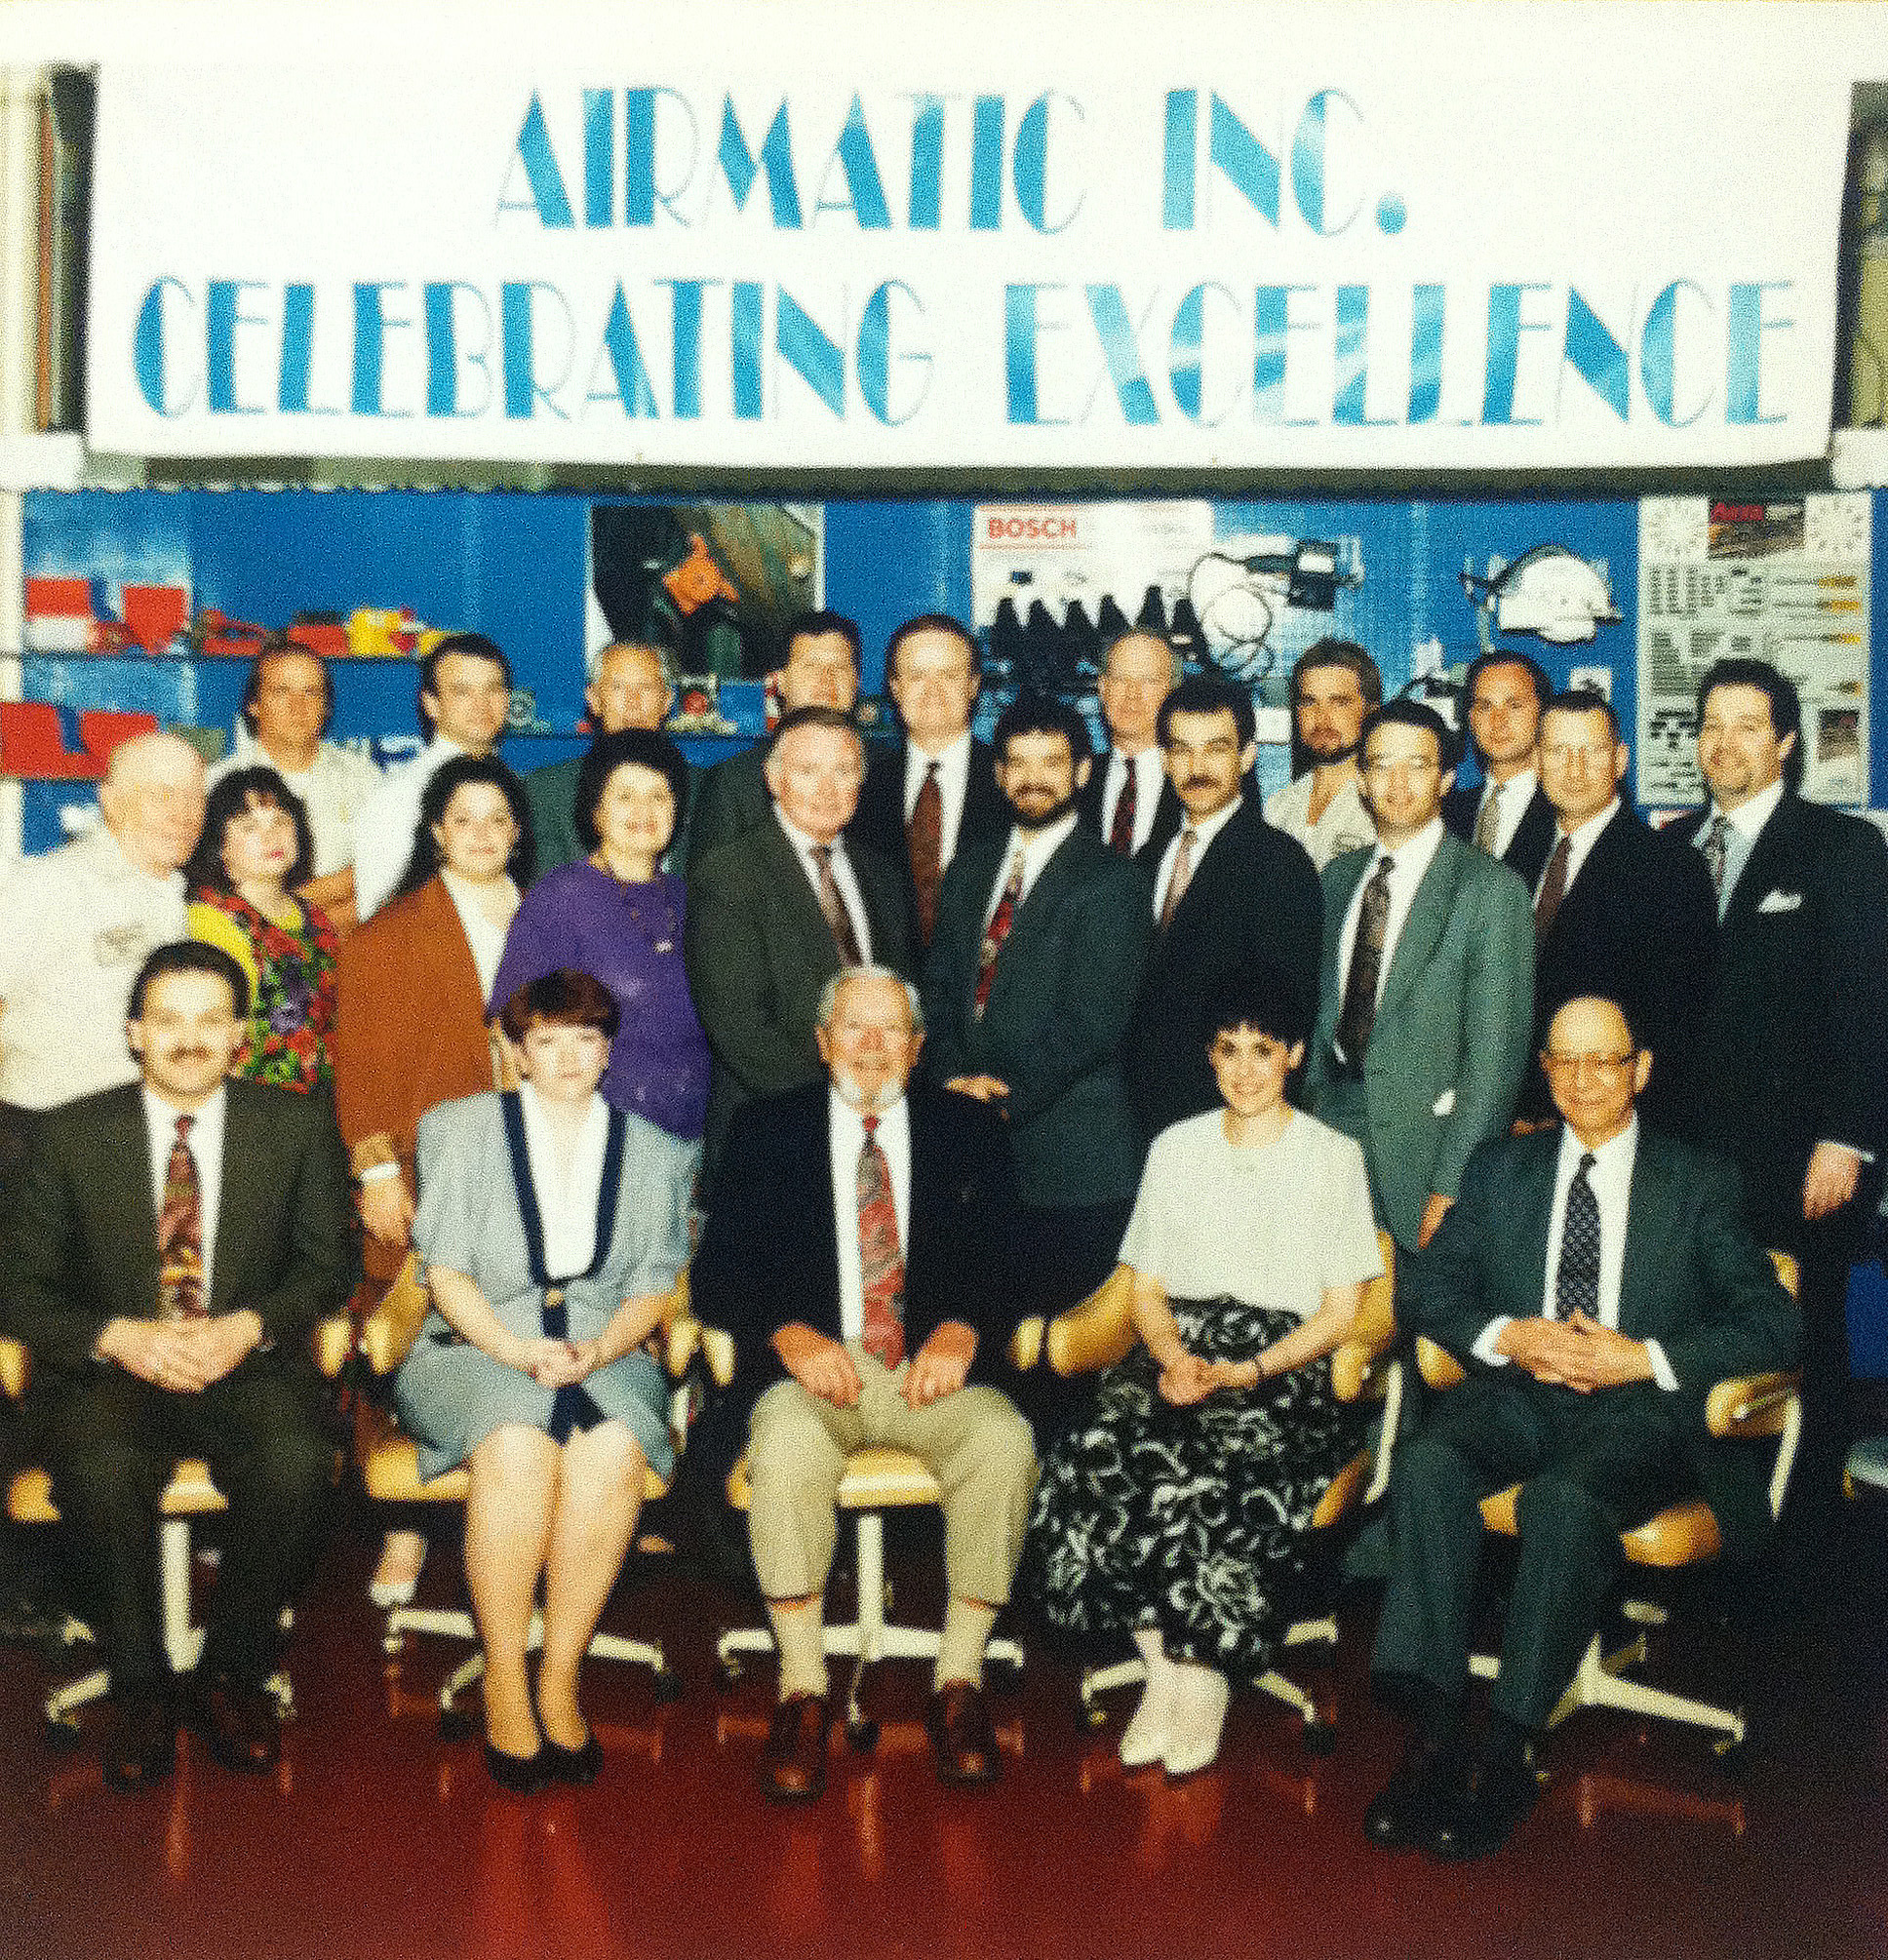 Airmatic 1993 Celebrating Excellence Event